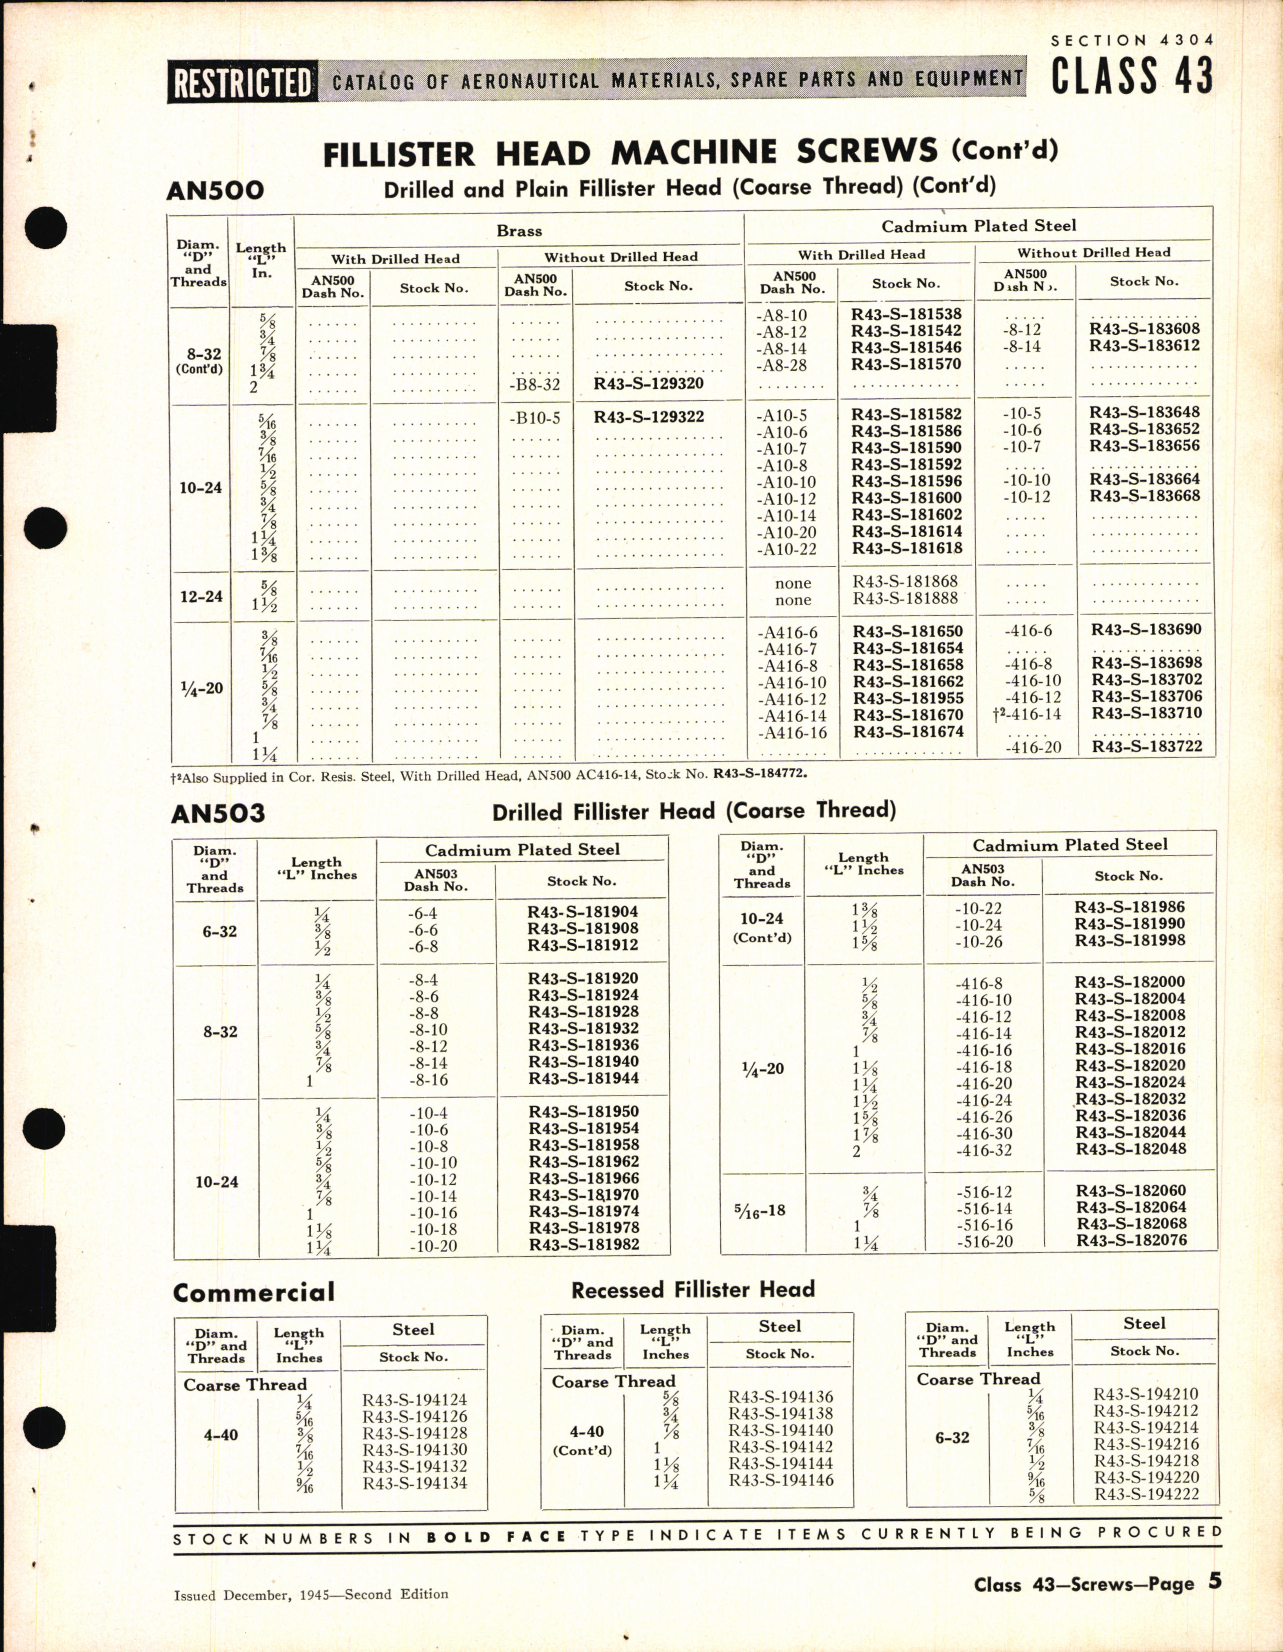 Sample page 5 from AirCorps Library document: Screws